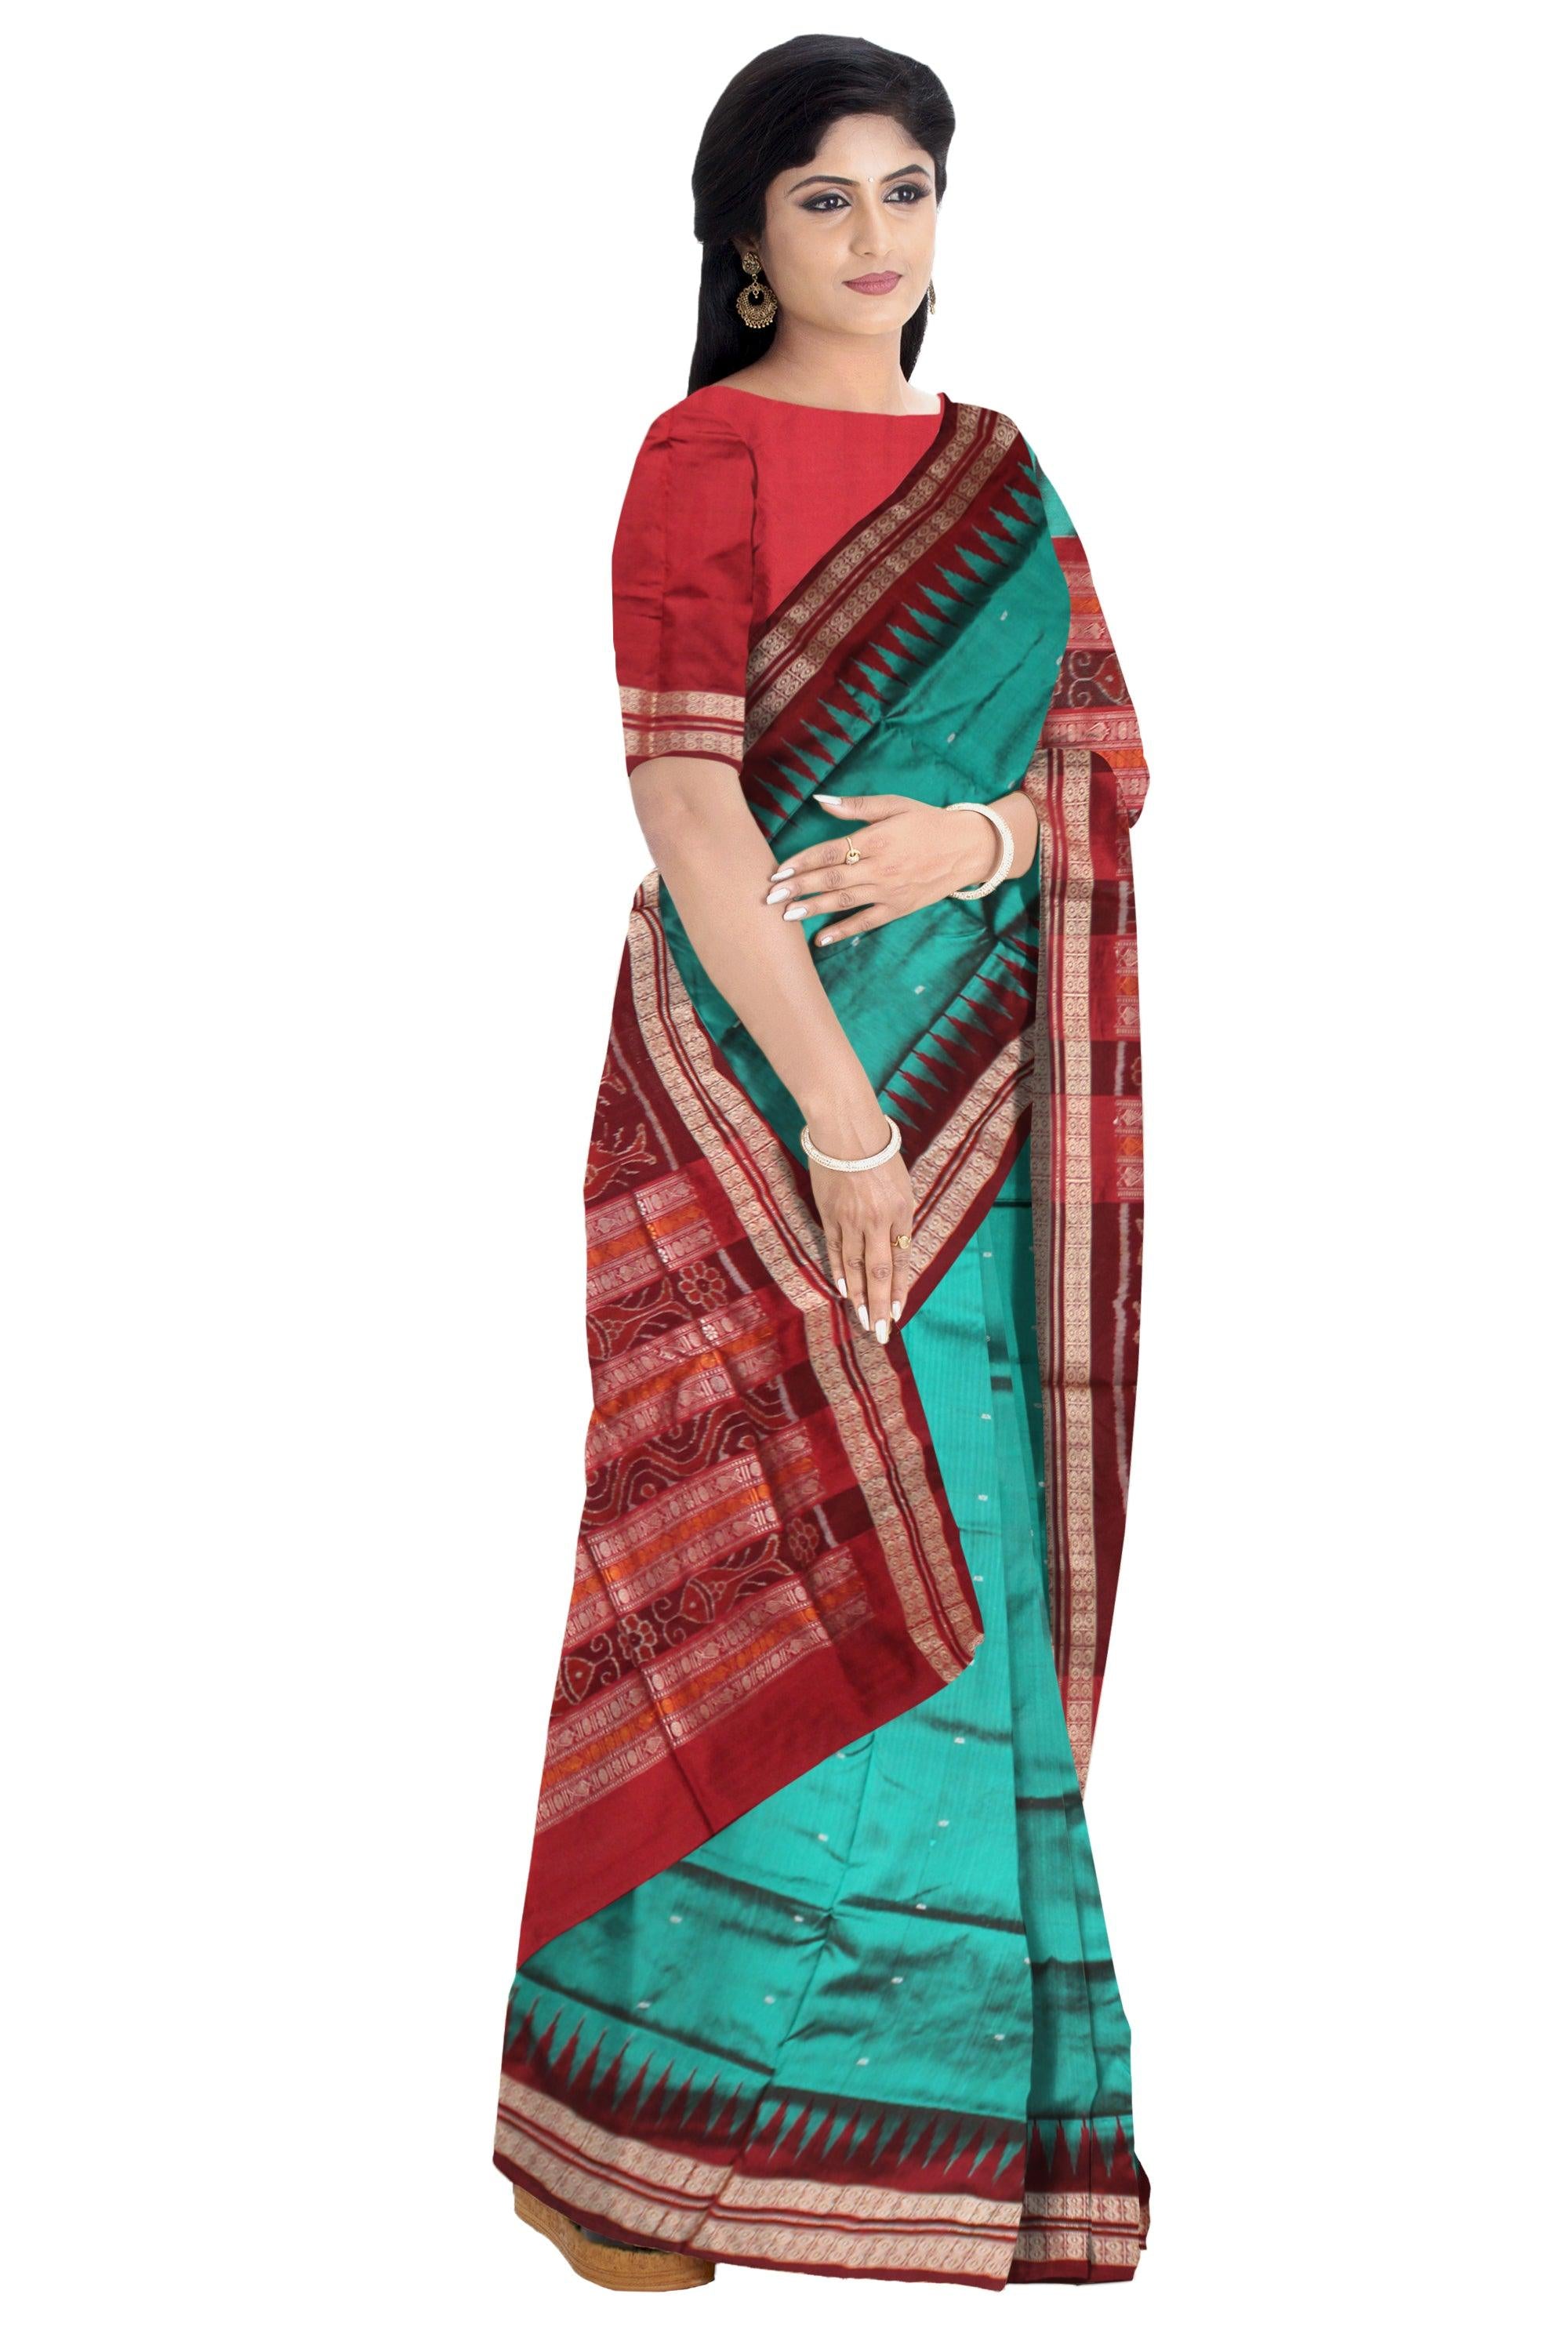 BOOTY PATTERN   SONEPUR SAREE IN PERSIAN GREEN AND MAROON COLOR  , GOLDEN BORDER WITH BLOUSE PIECE. - Koshali Arts & Crafts Enterprise